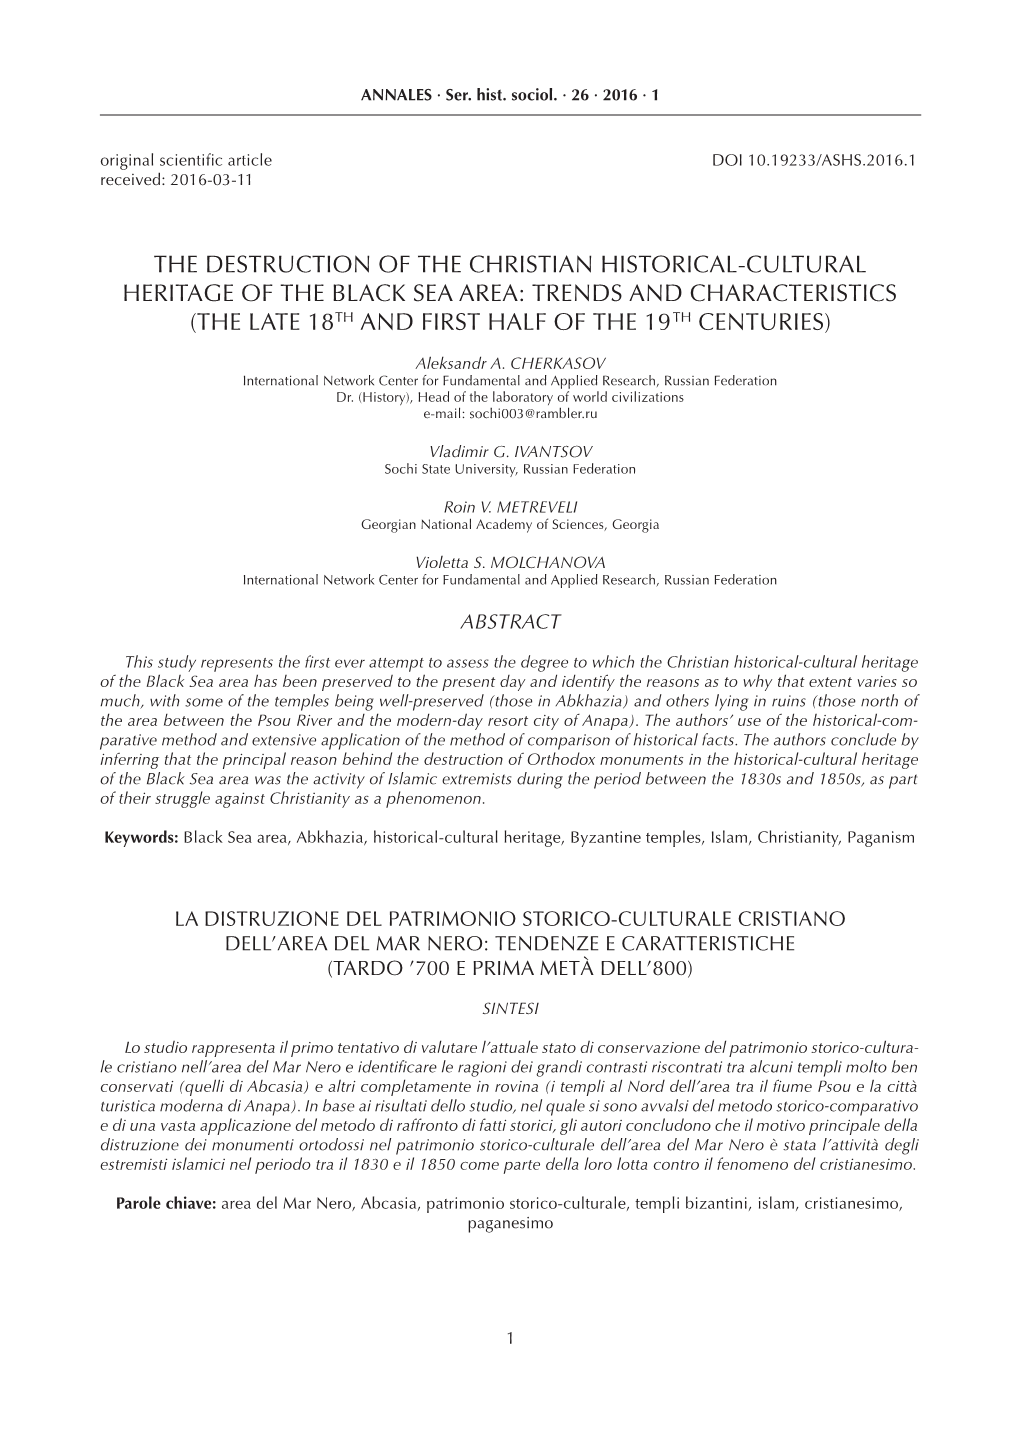 The Destruction of the Christian Historical-Cultural Heritage of the Black Sea Area: Trends and Characteristics (The Late 18Th and First Half of the 19Th Centuries)